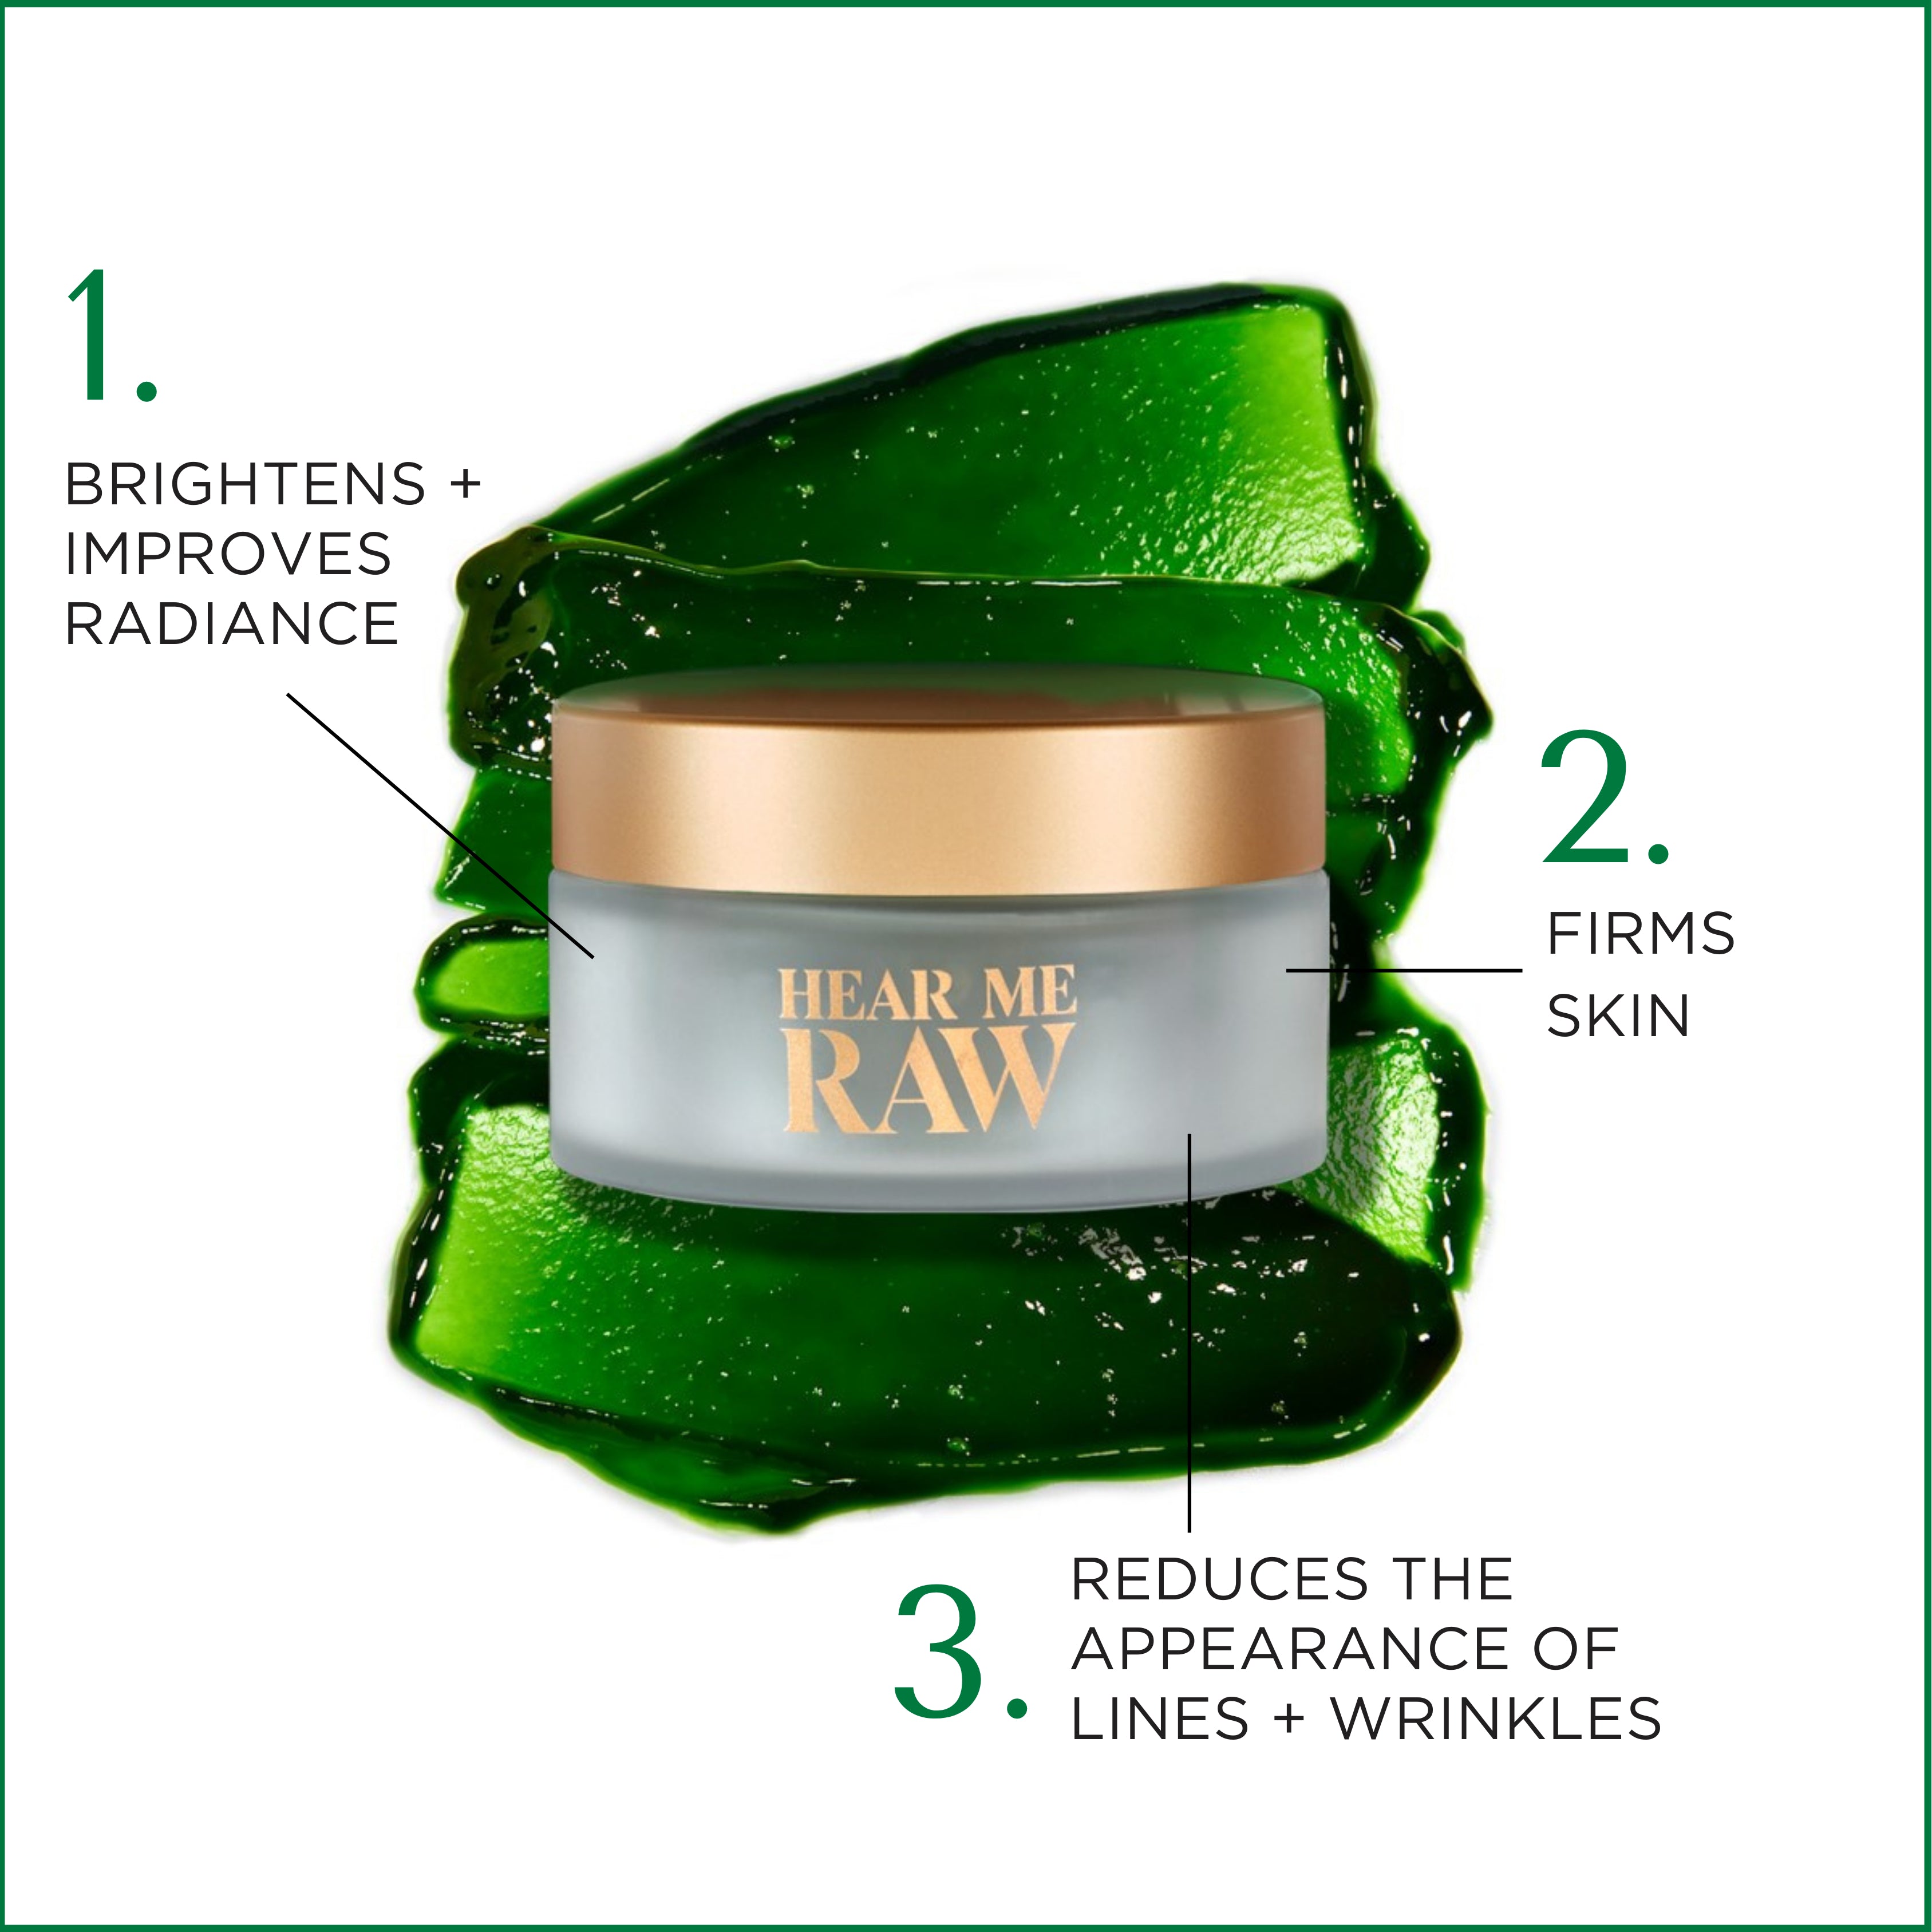 The benefits of Hear Me Raw The Brightener